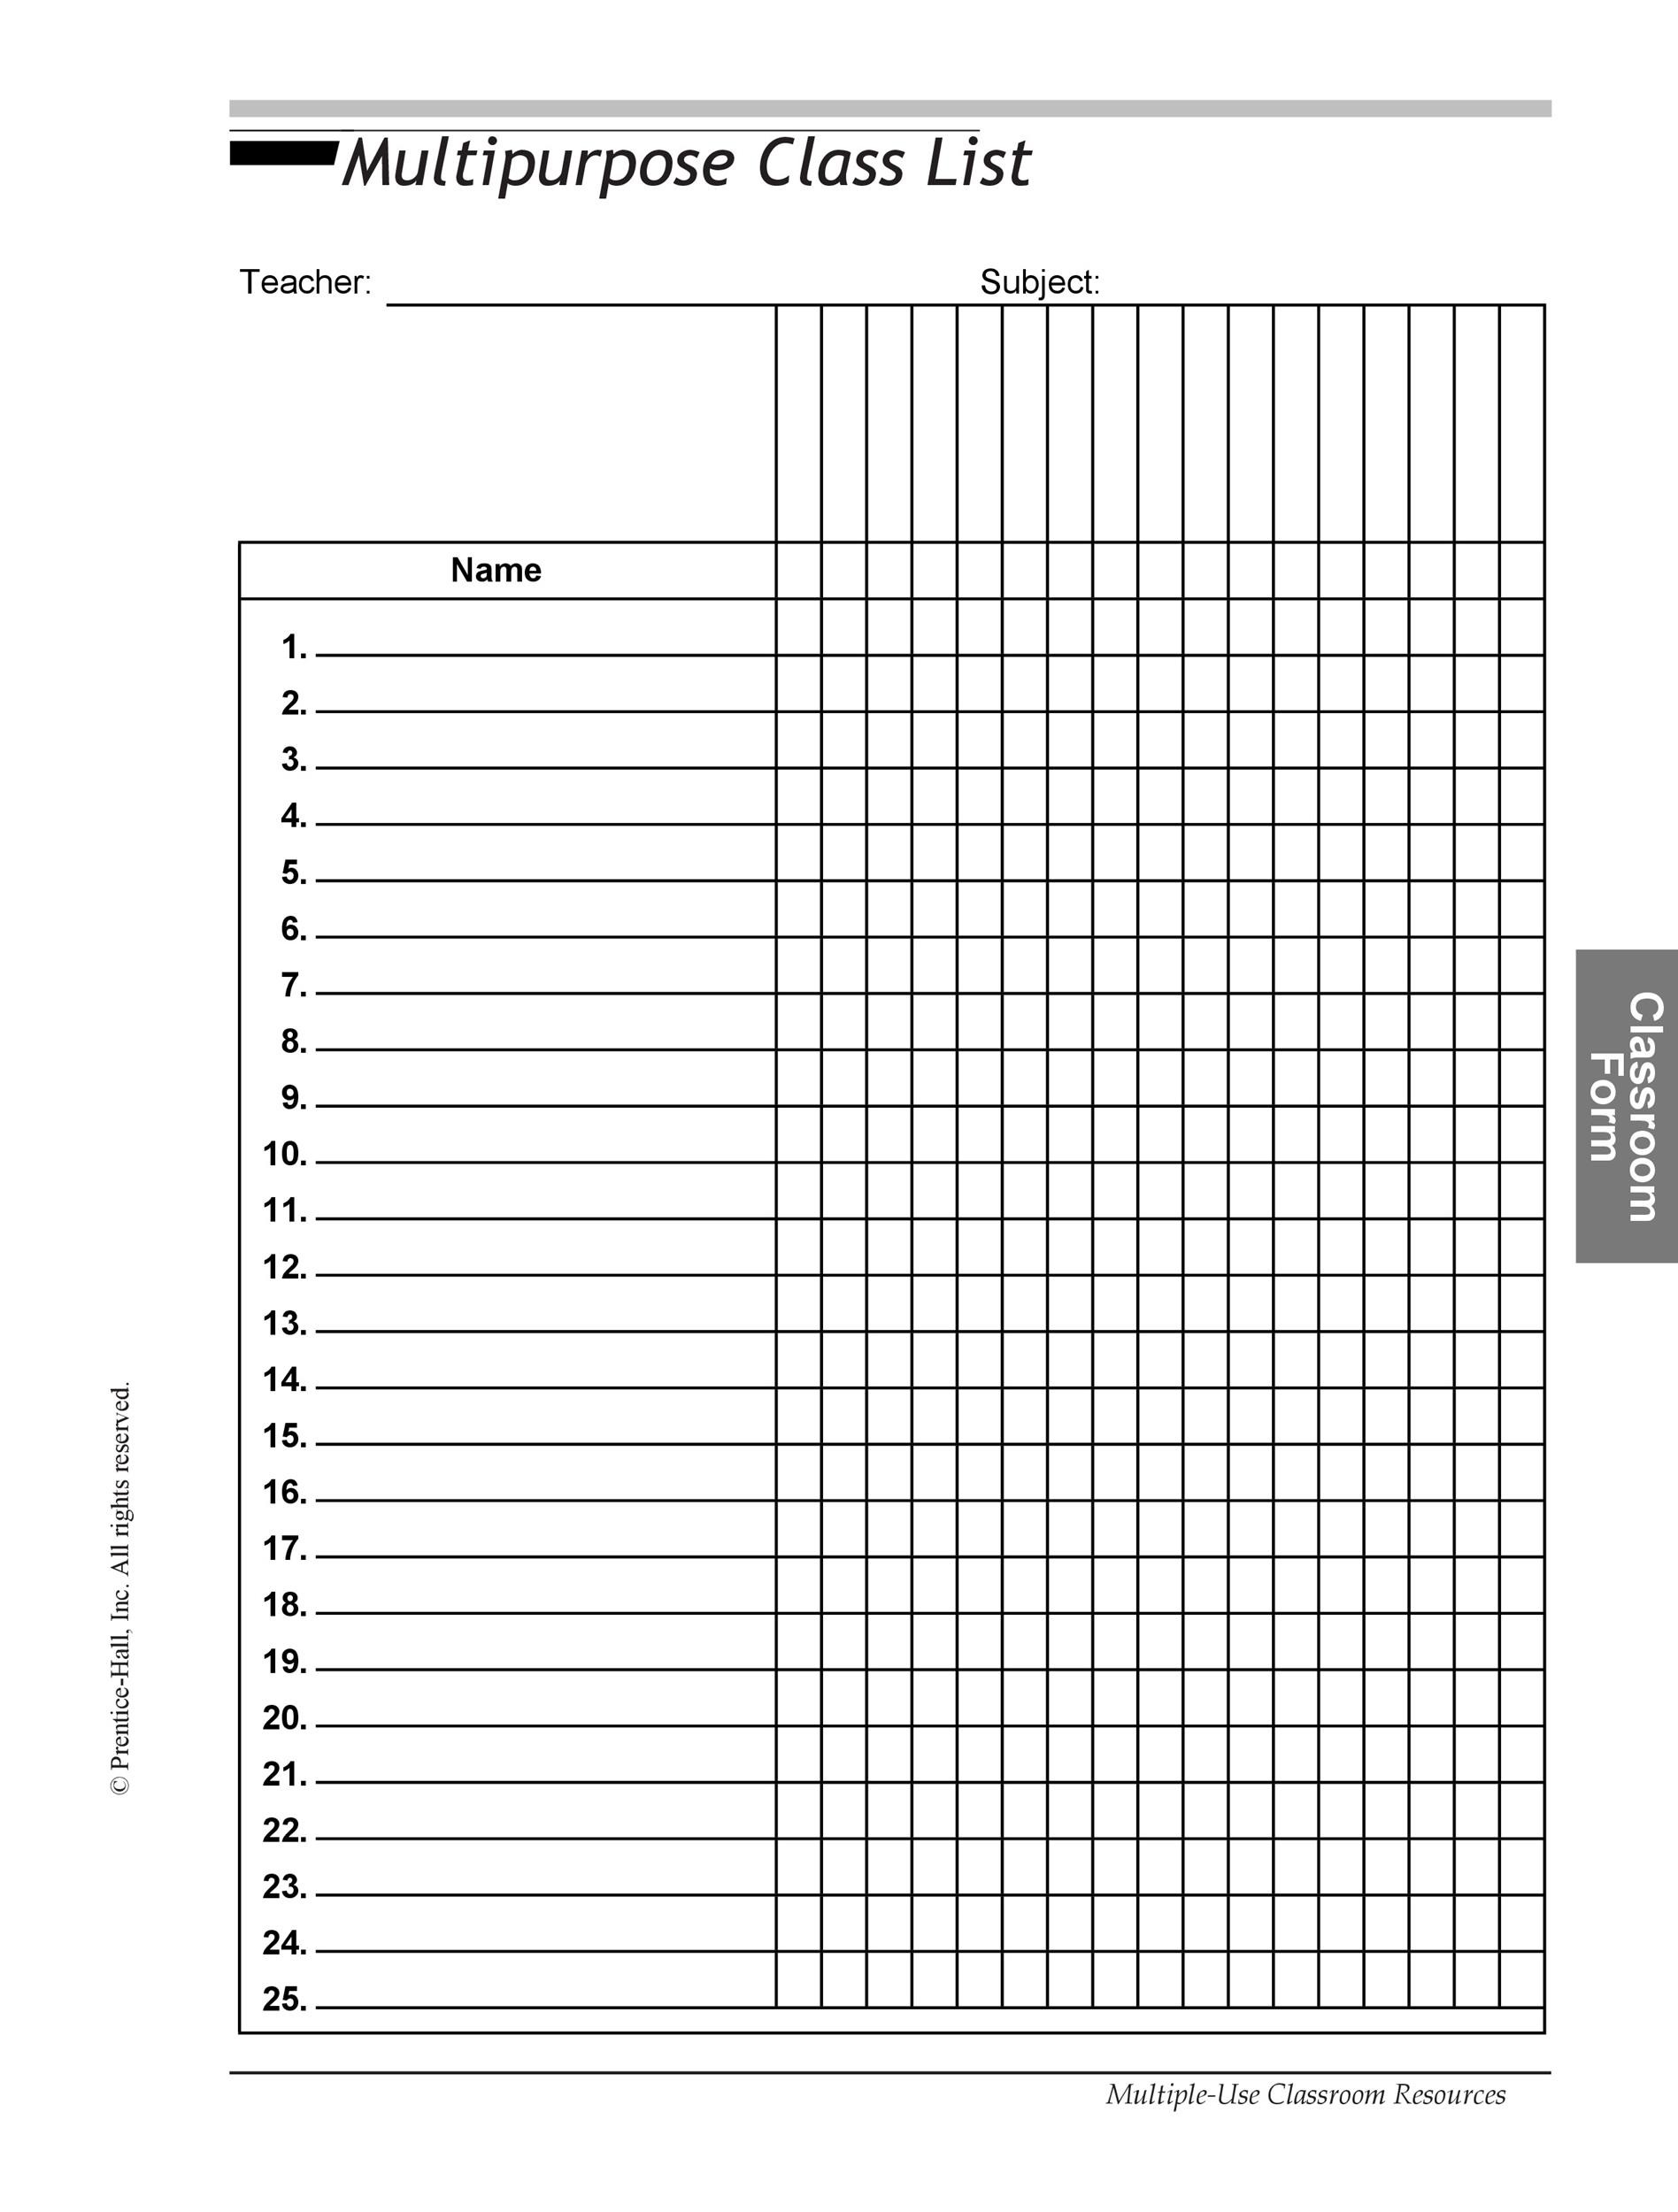 37 Class Roster Templates Student Roster Templates for Teachers